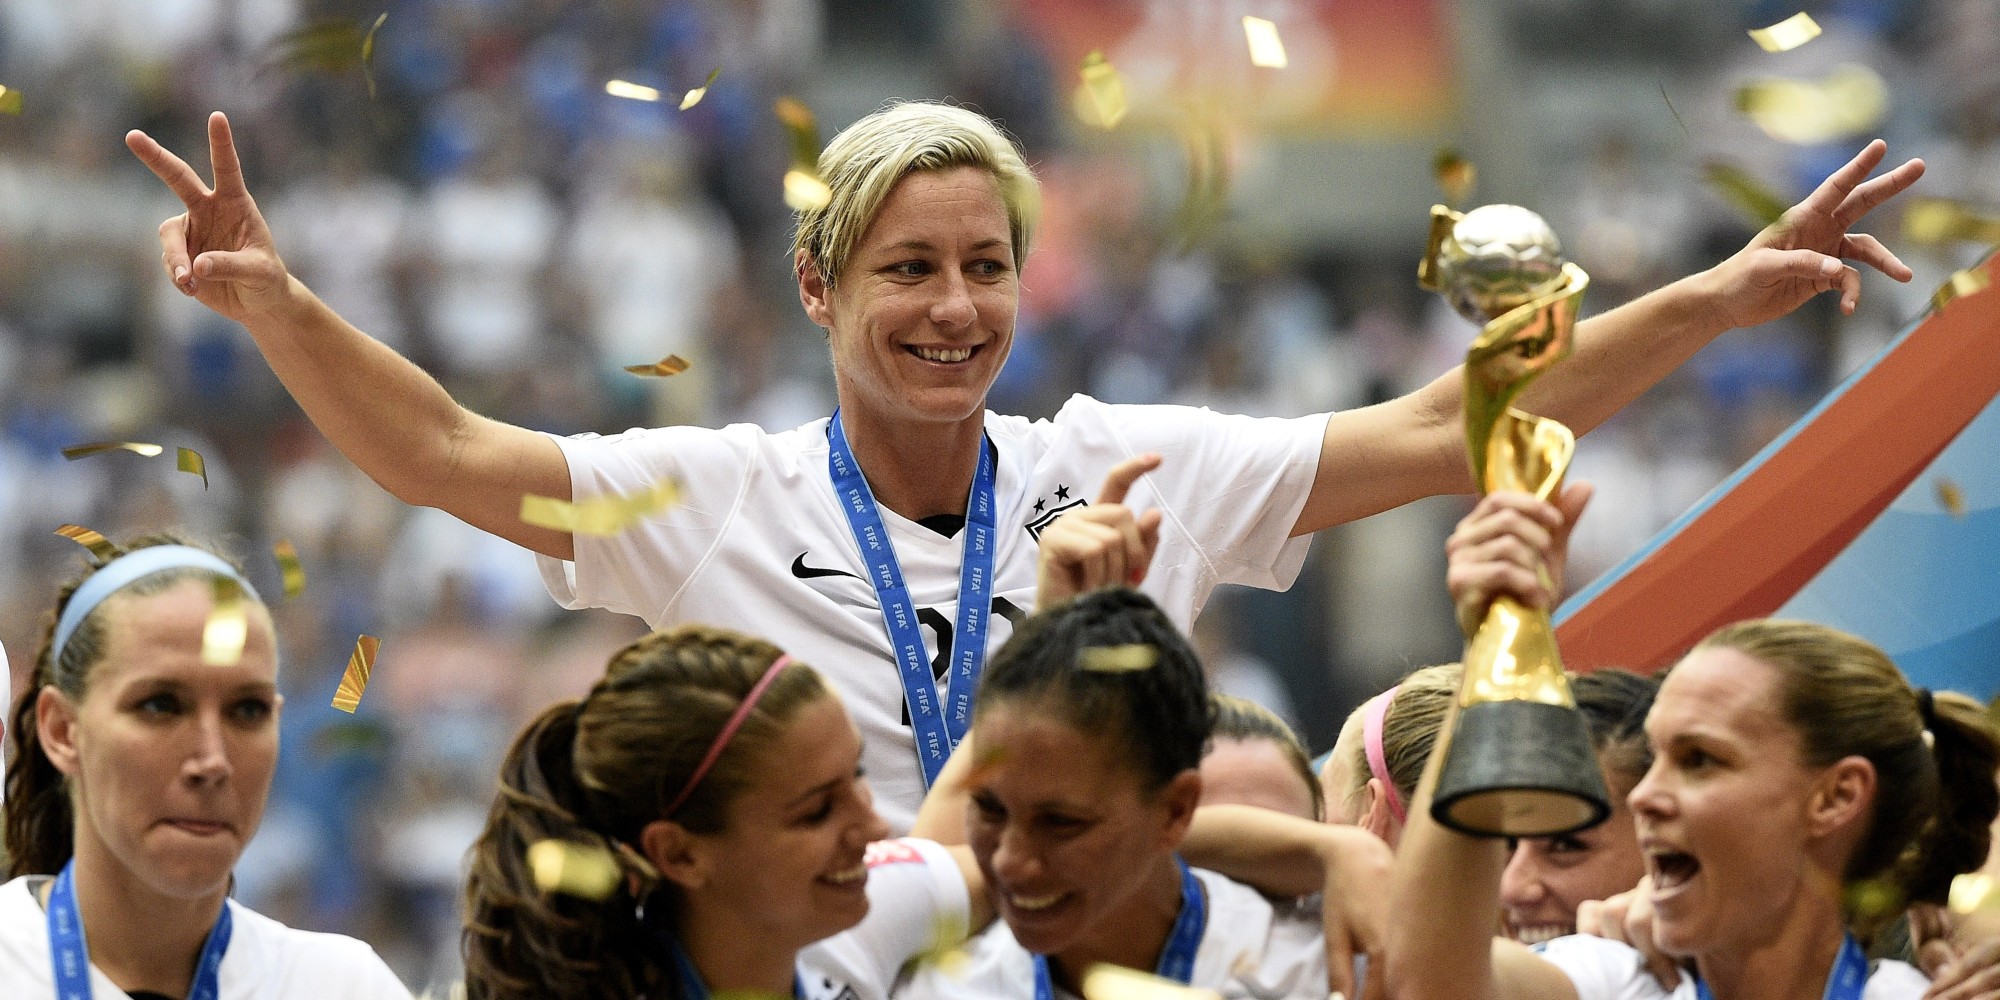 Women's World Cup Final Was The Most Watched Soccer Match In U.S